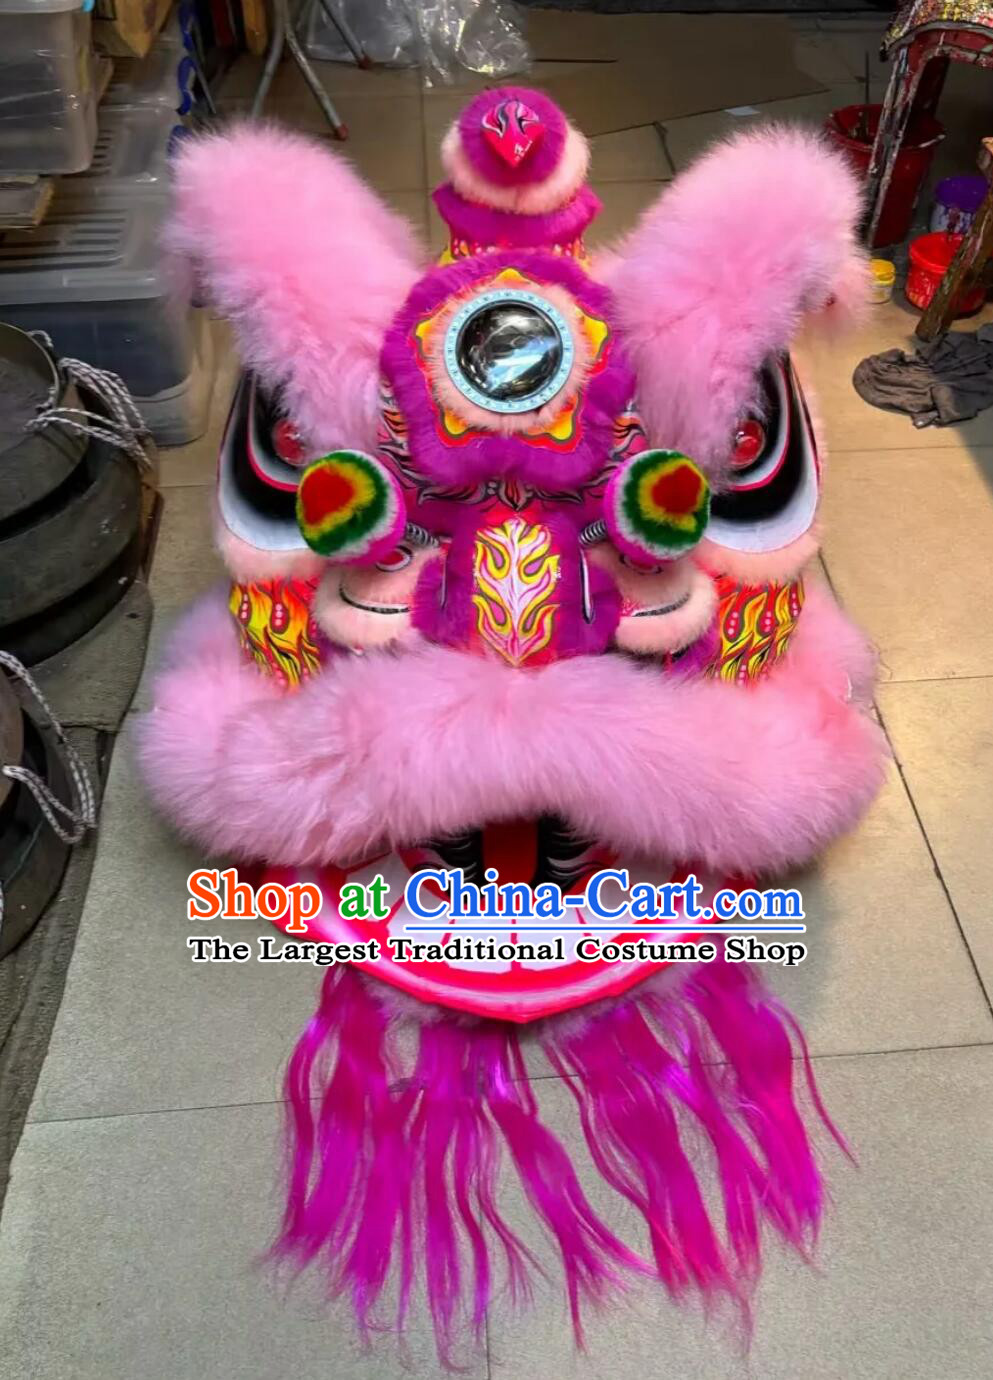 Chinese Lion Dance Equipment Online Shop China Fut San Dancing Lion Traditional Handmade Pink Wool Lion Costume Complete Set